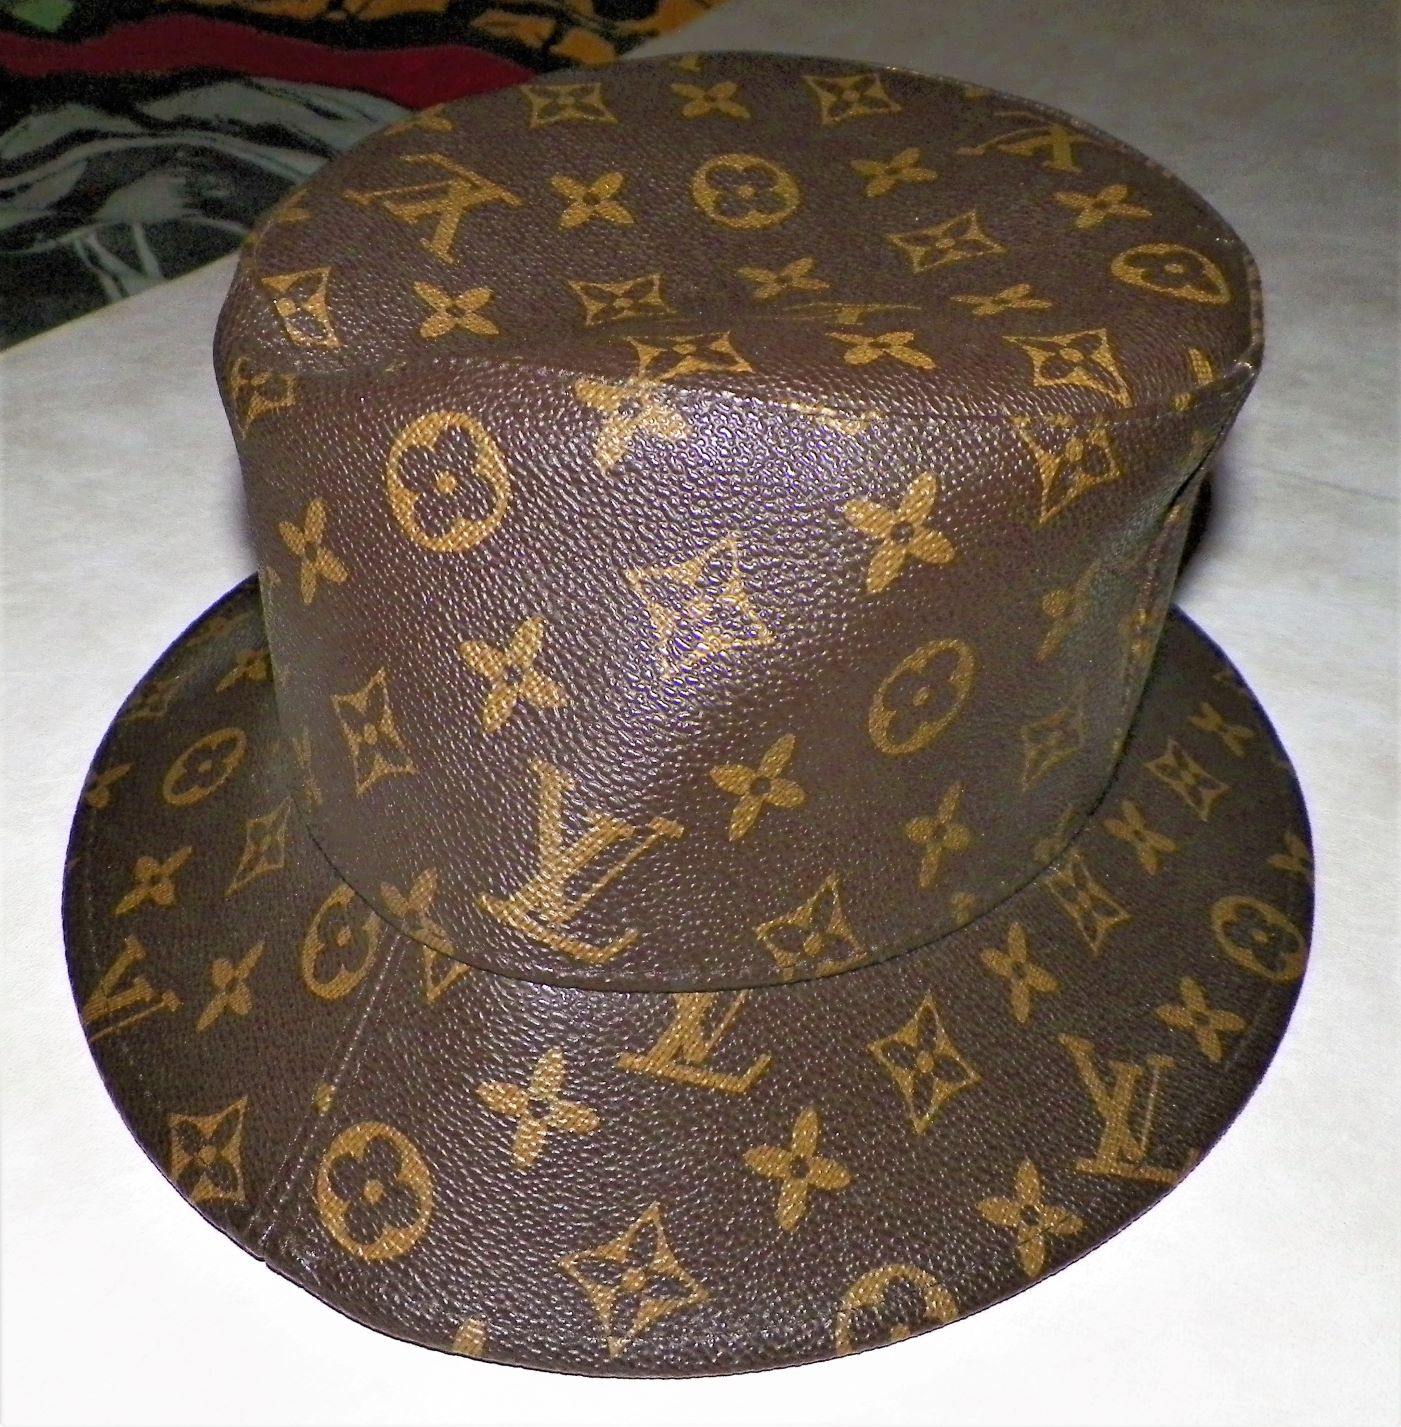 How to tell if a Louis Vuitton baseball-cap/hat is real - Quora